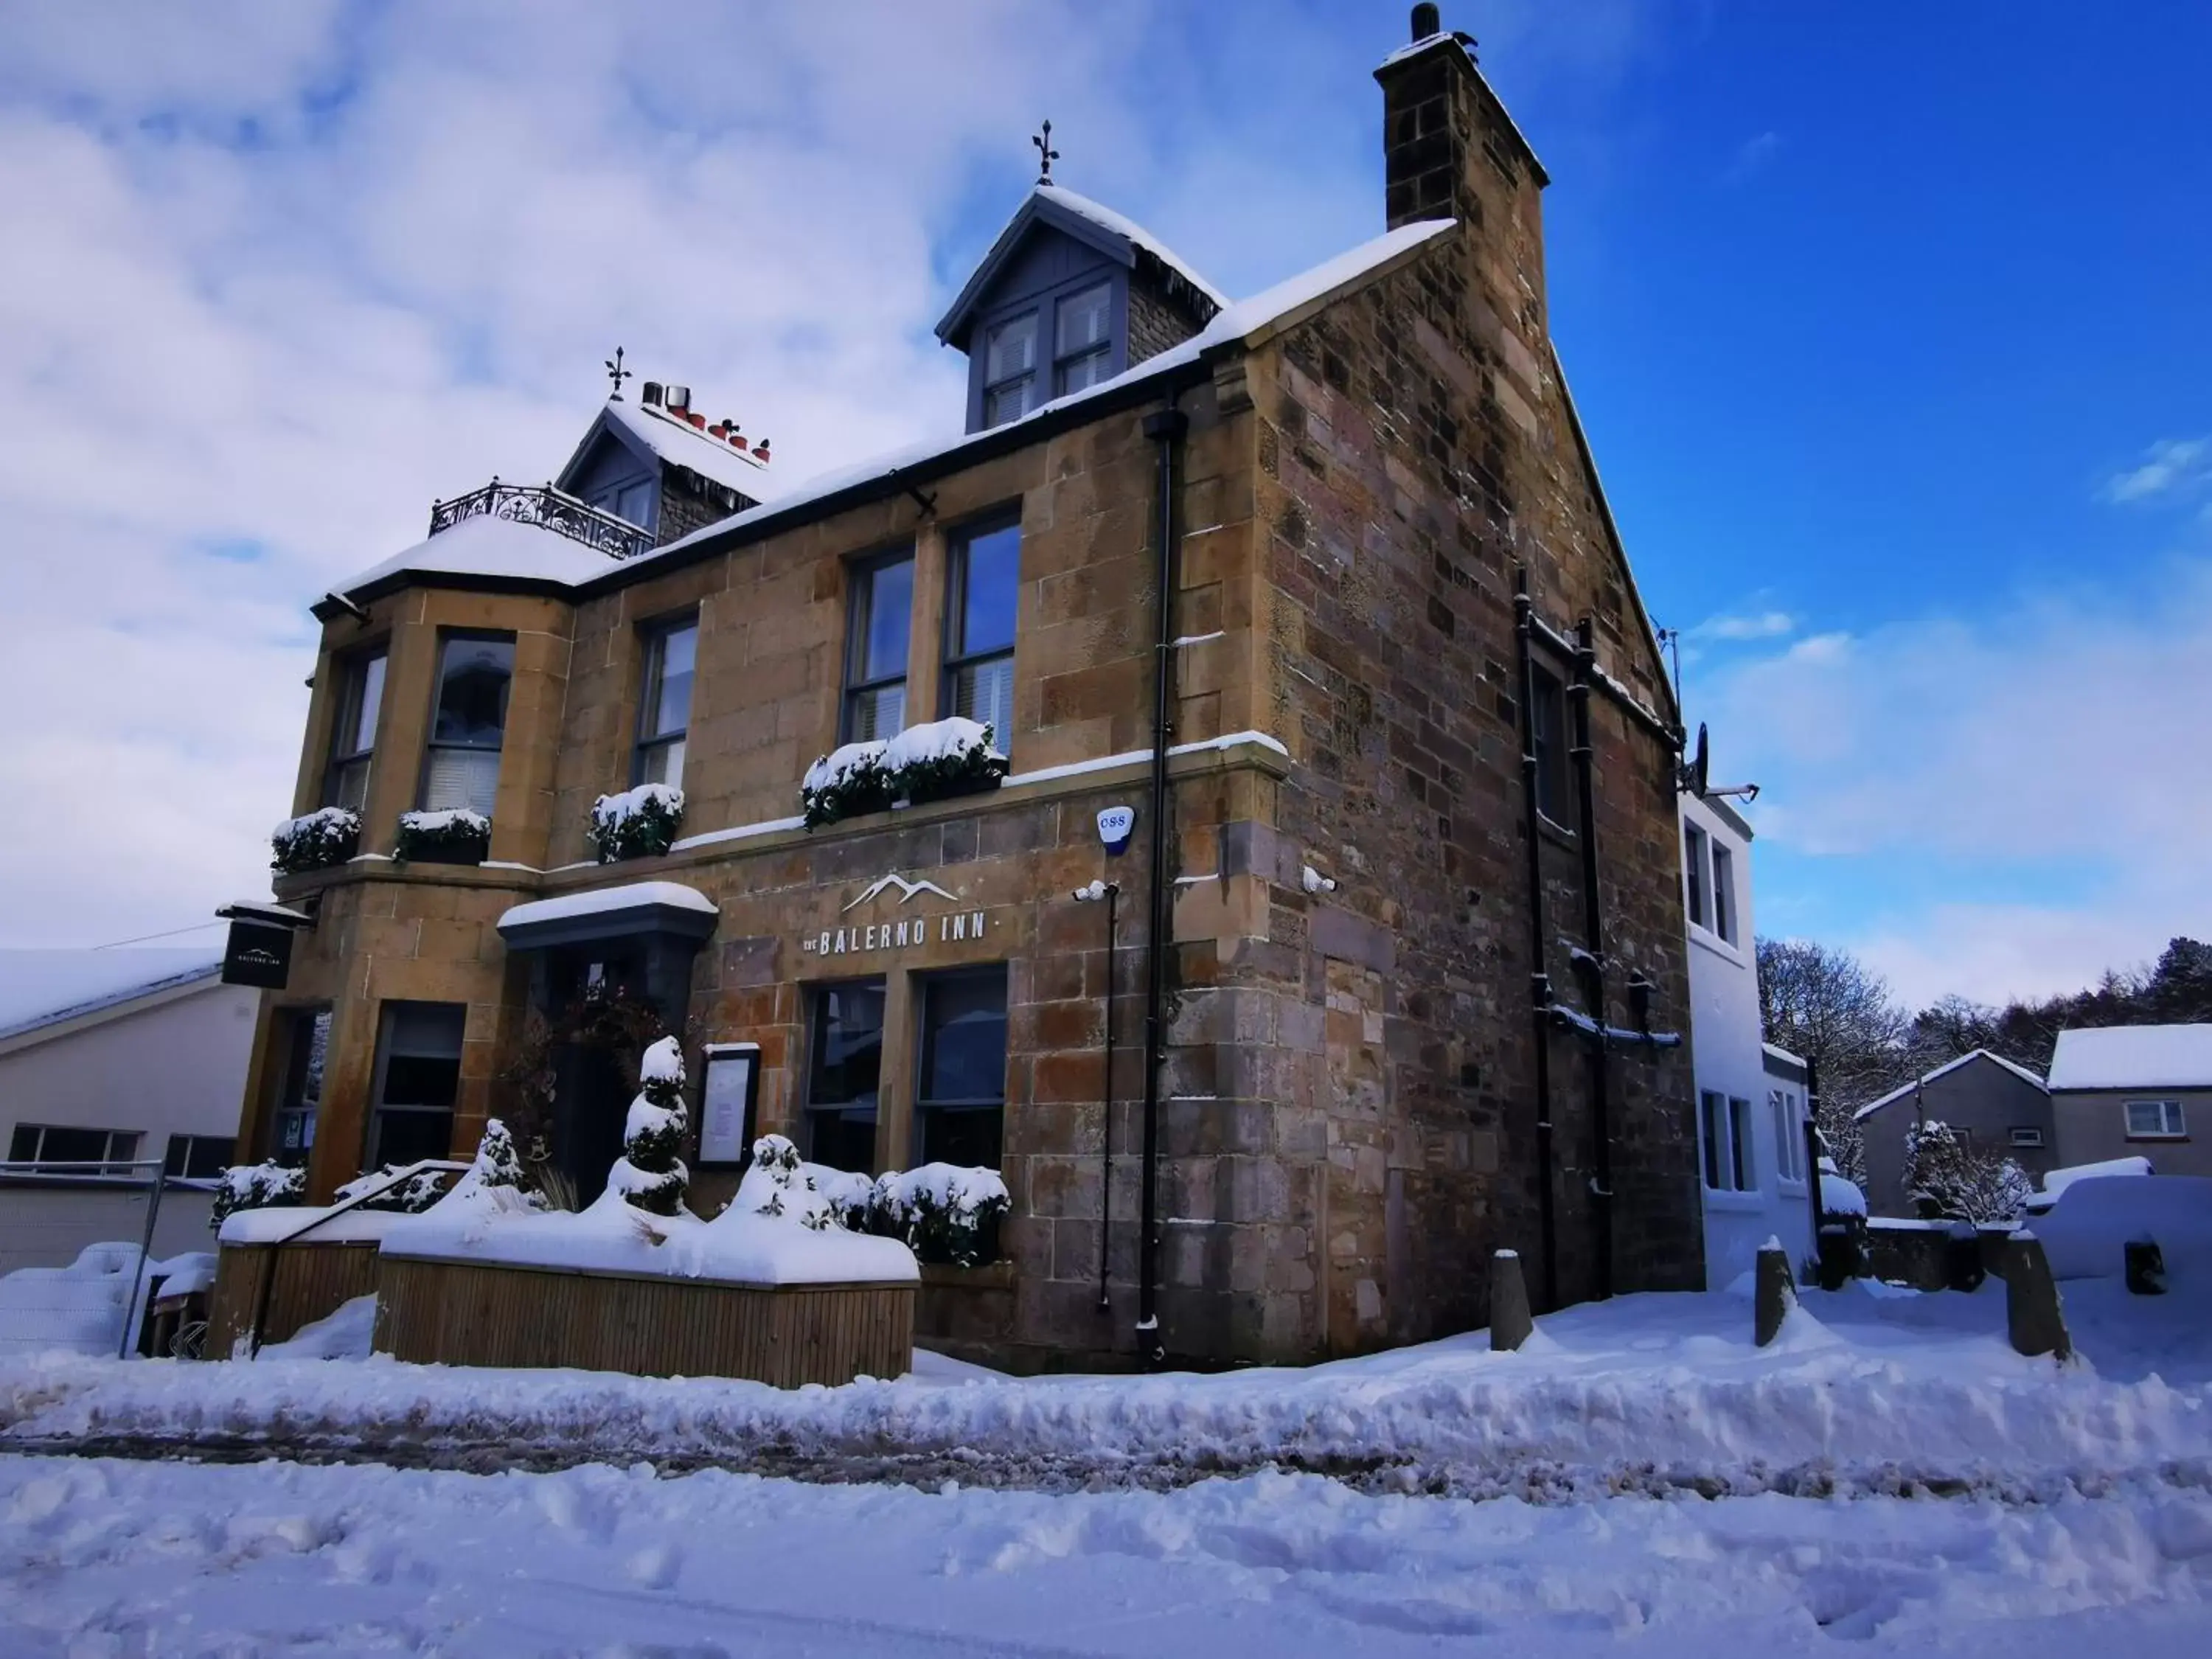 Property building, Winter in The Balerno Inn